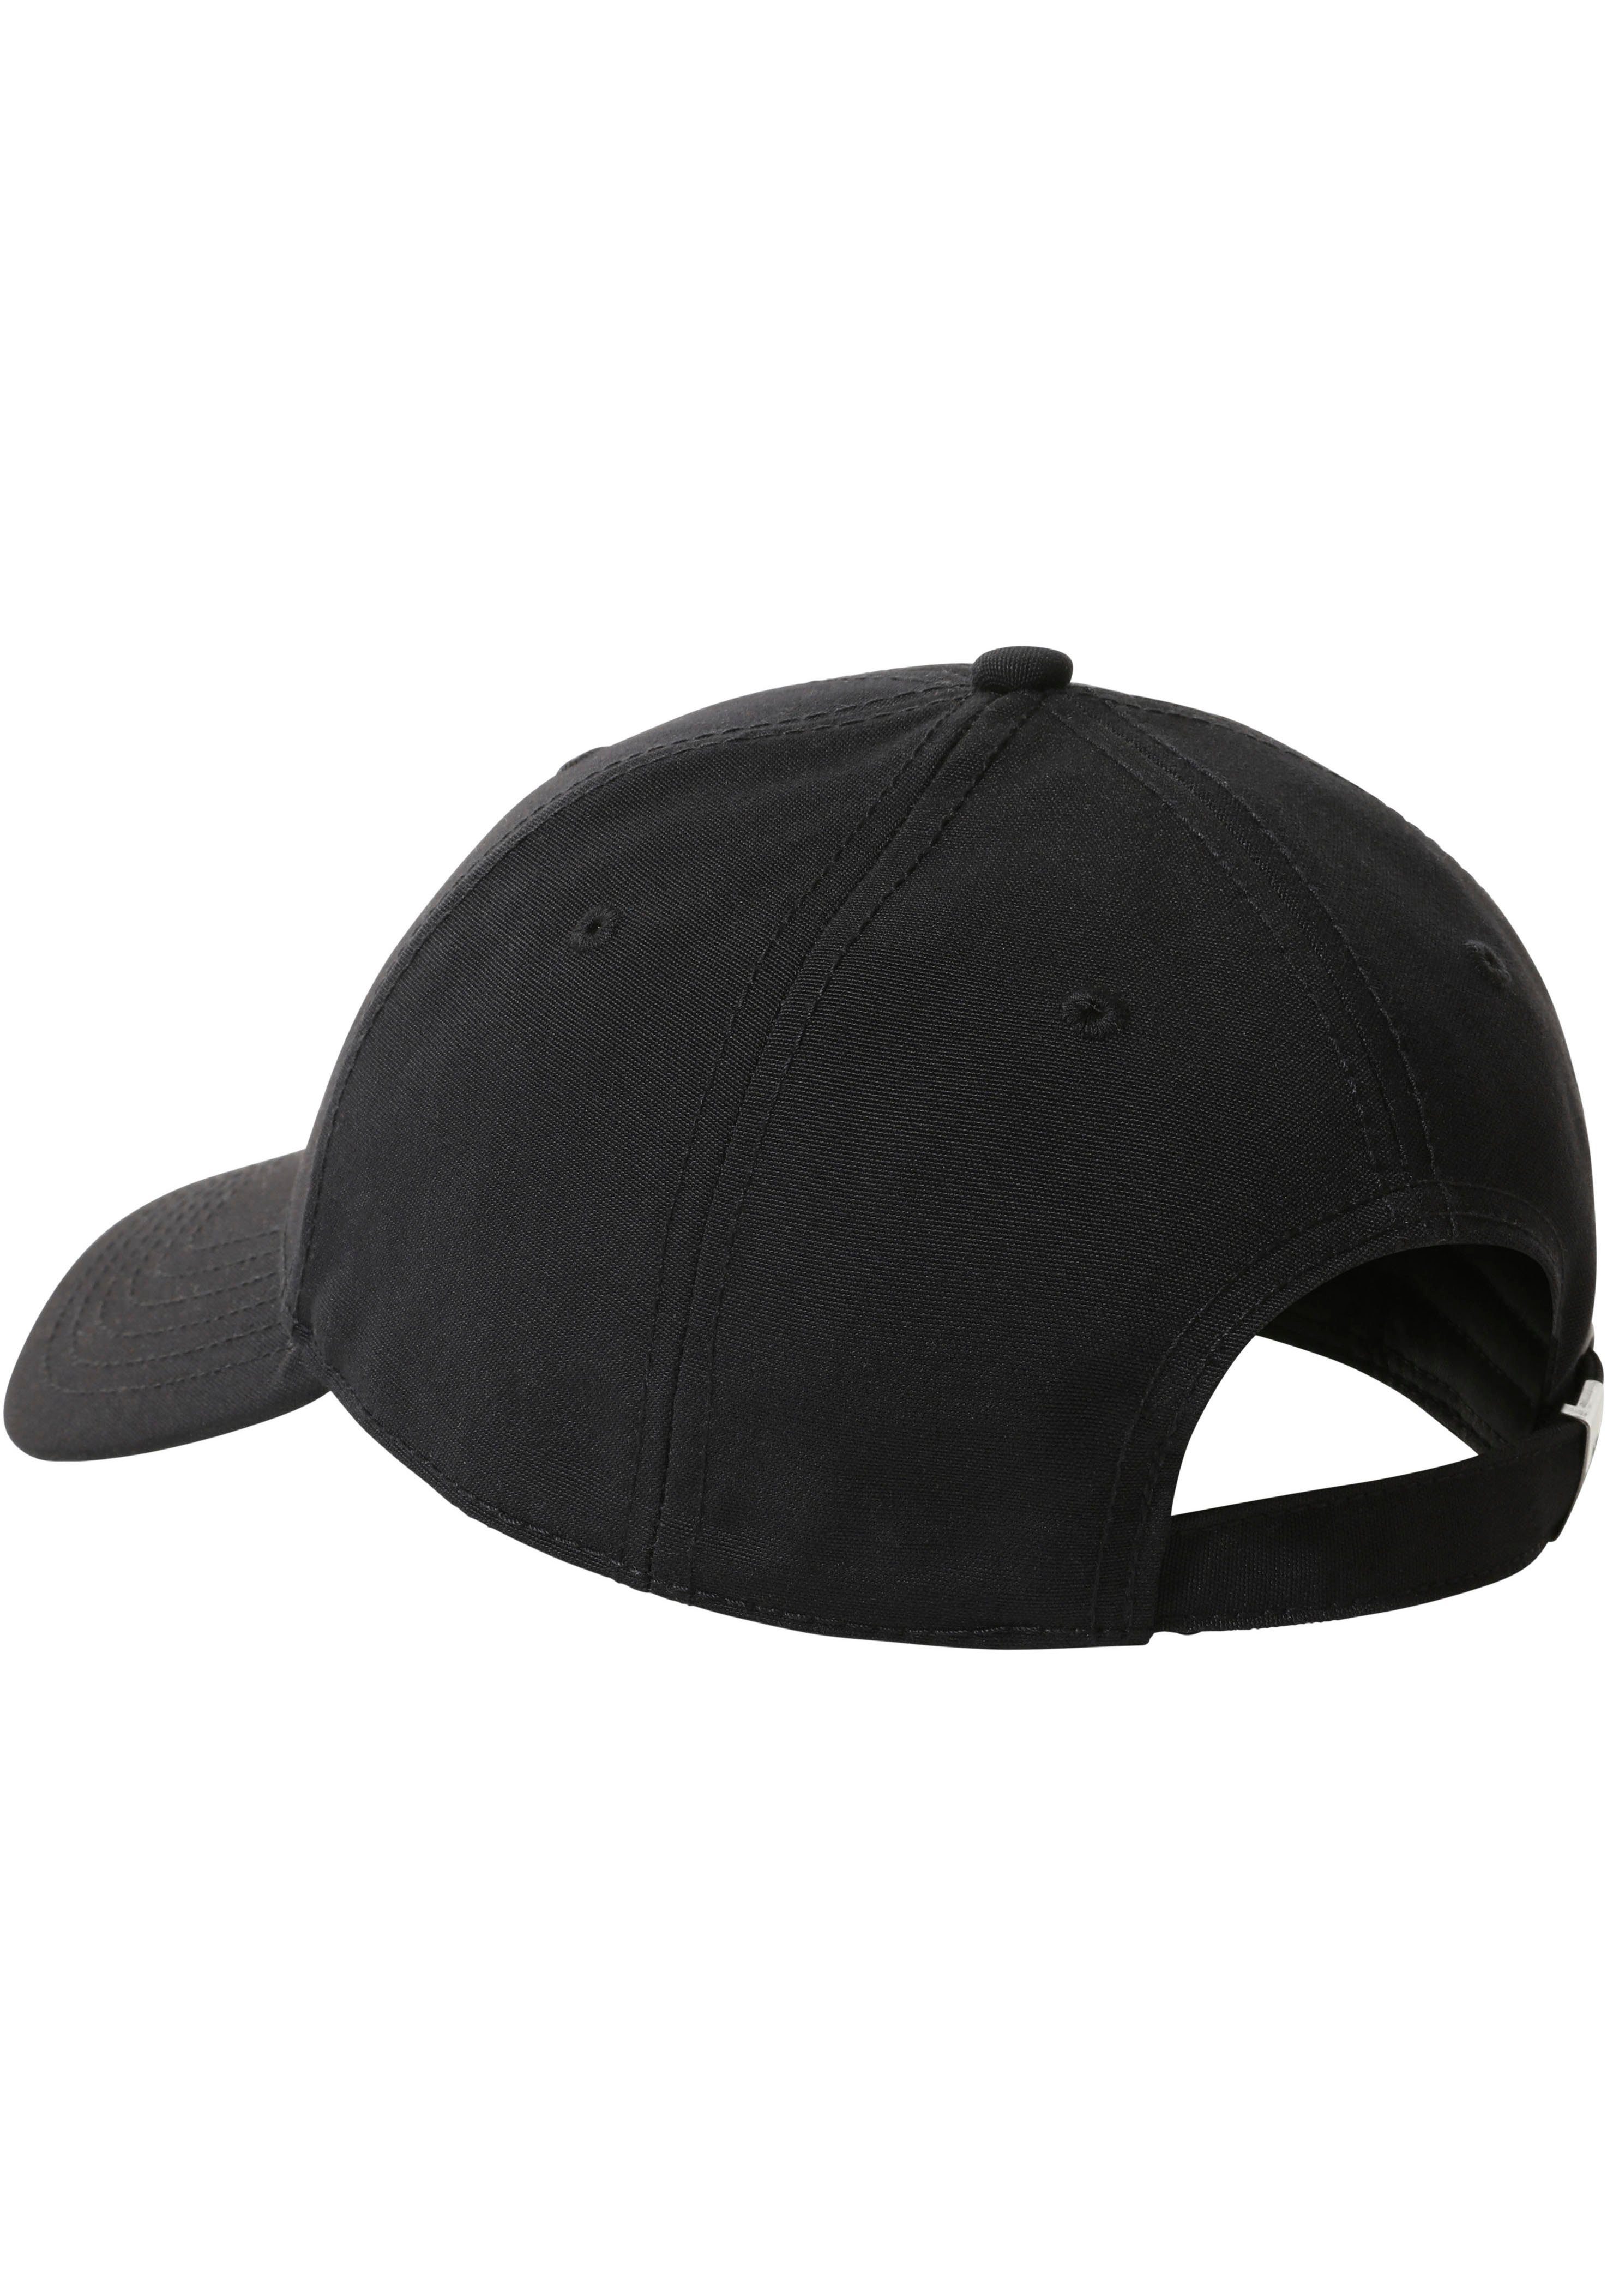 Cap The North Face RECYCLED Baseball schwarz CLASSIC HAT 66